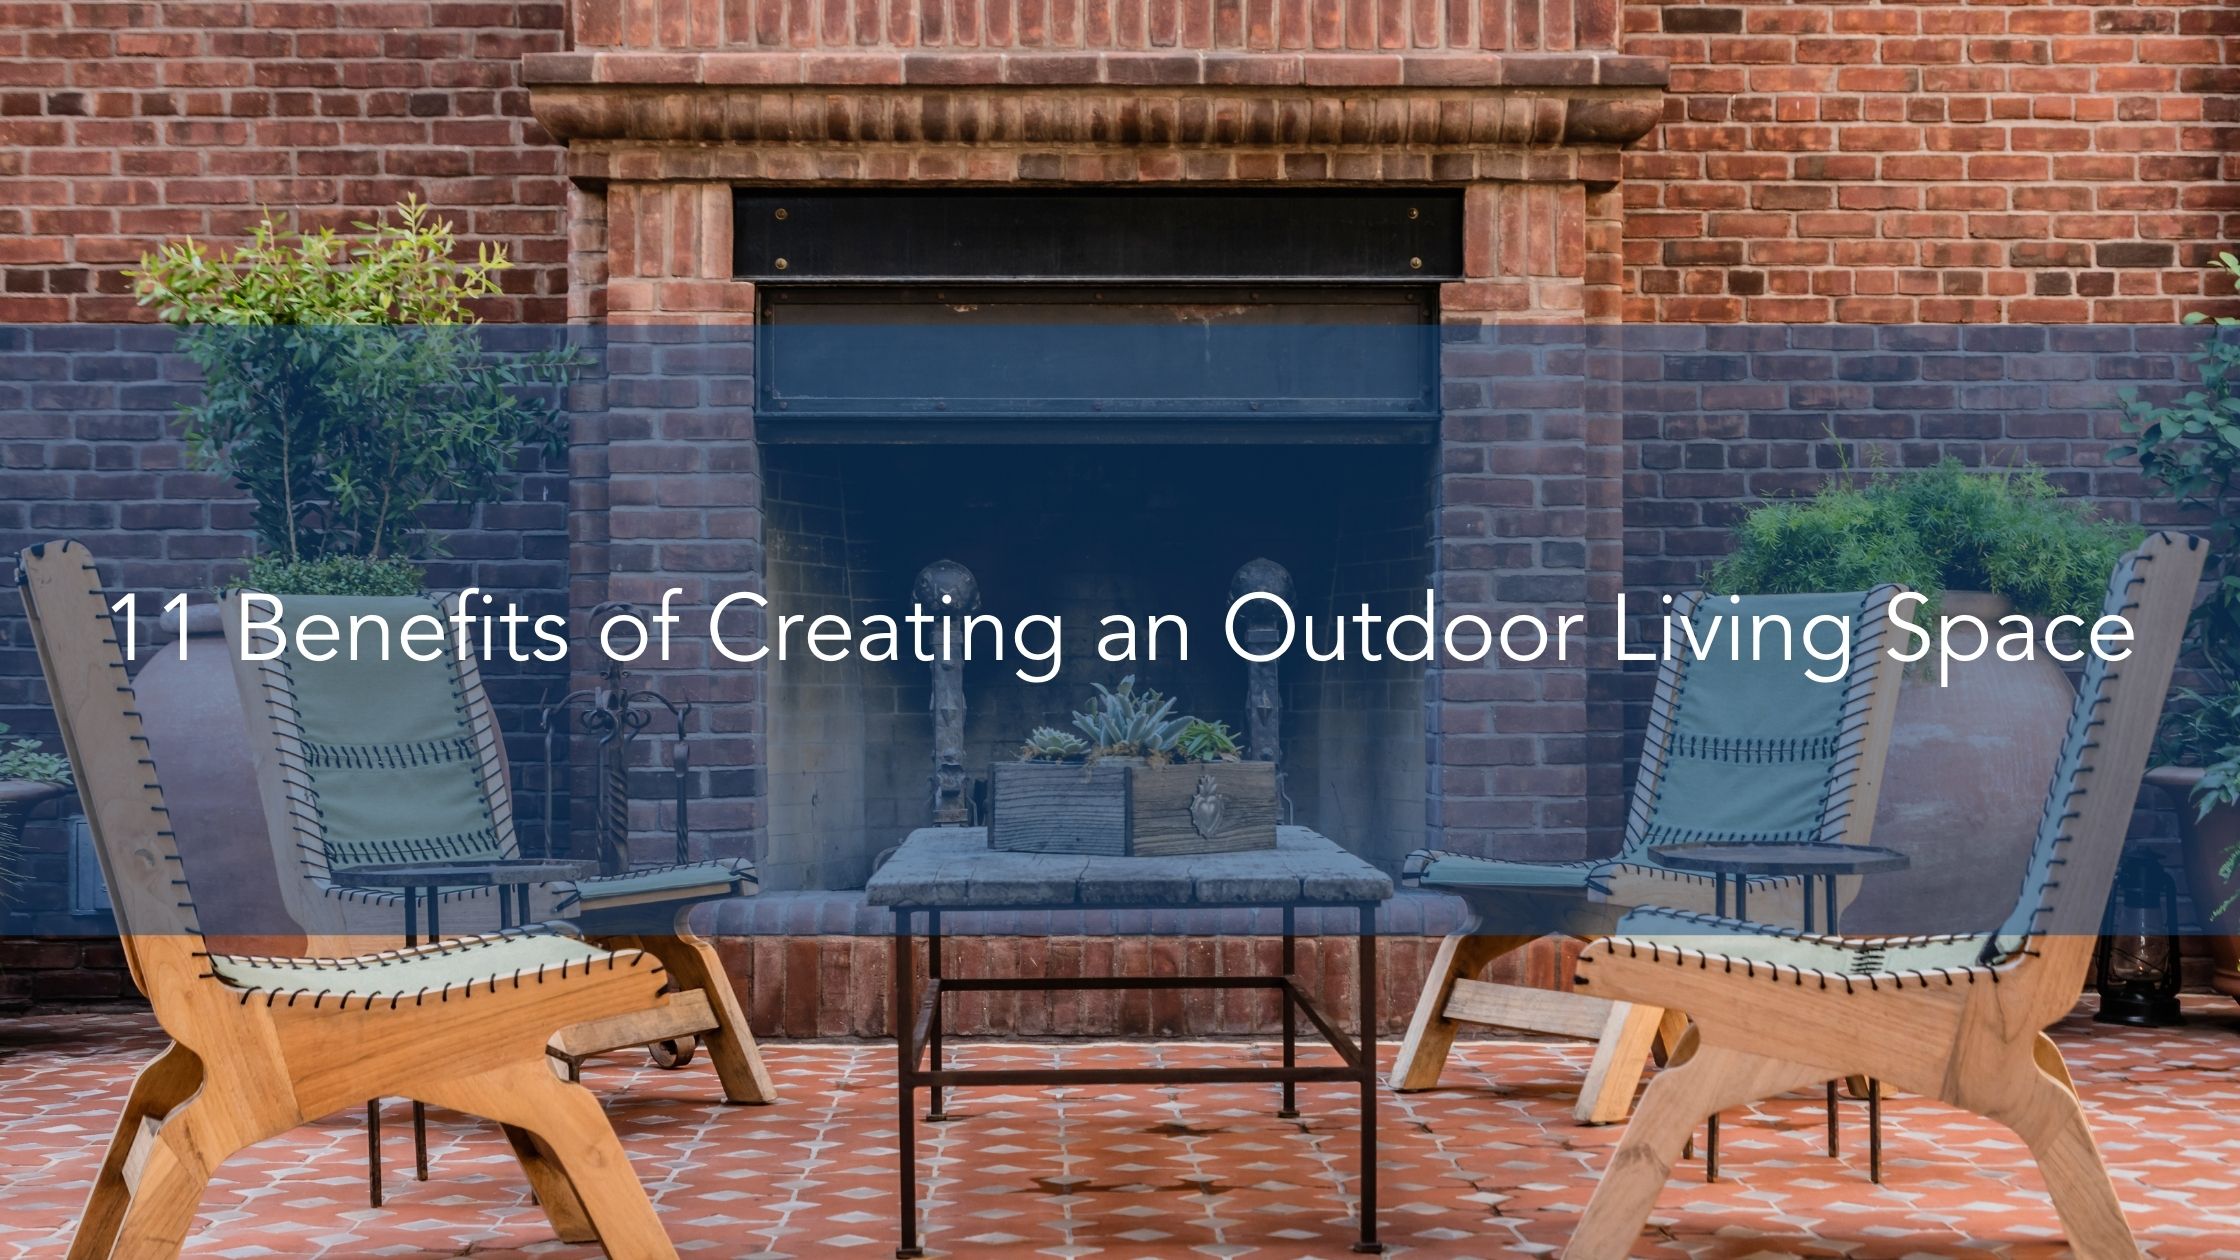 11 Benefits of Creating an Outdoor Living Space